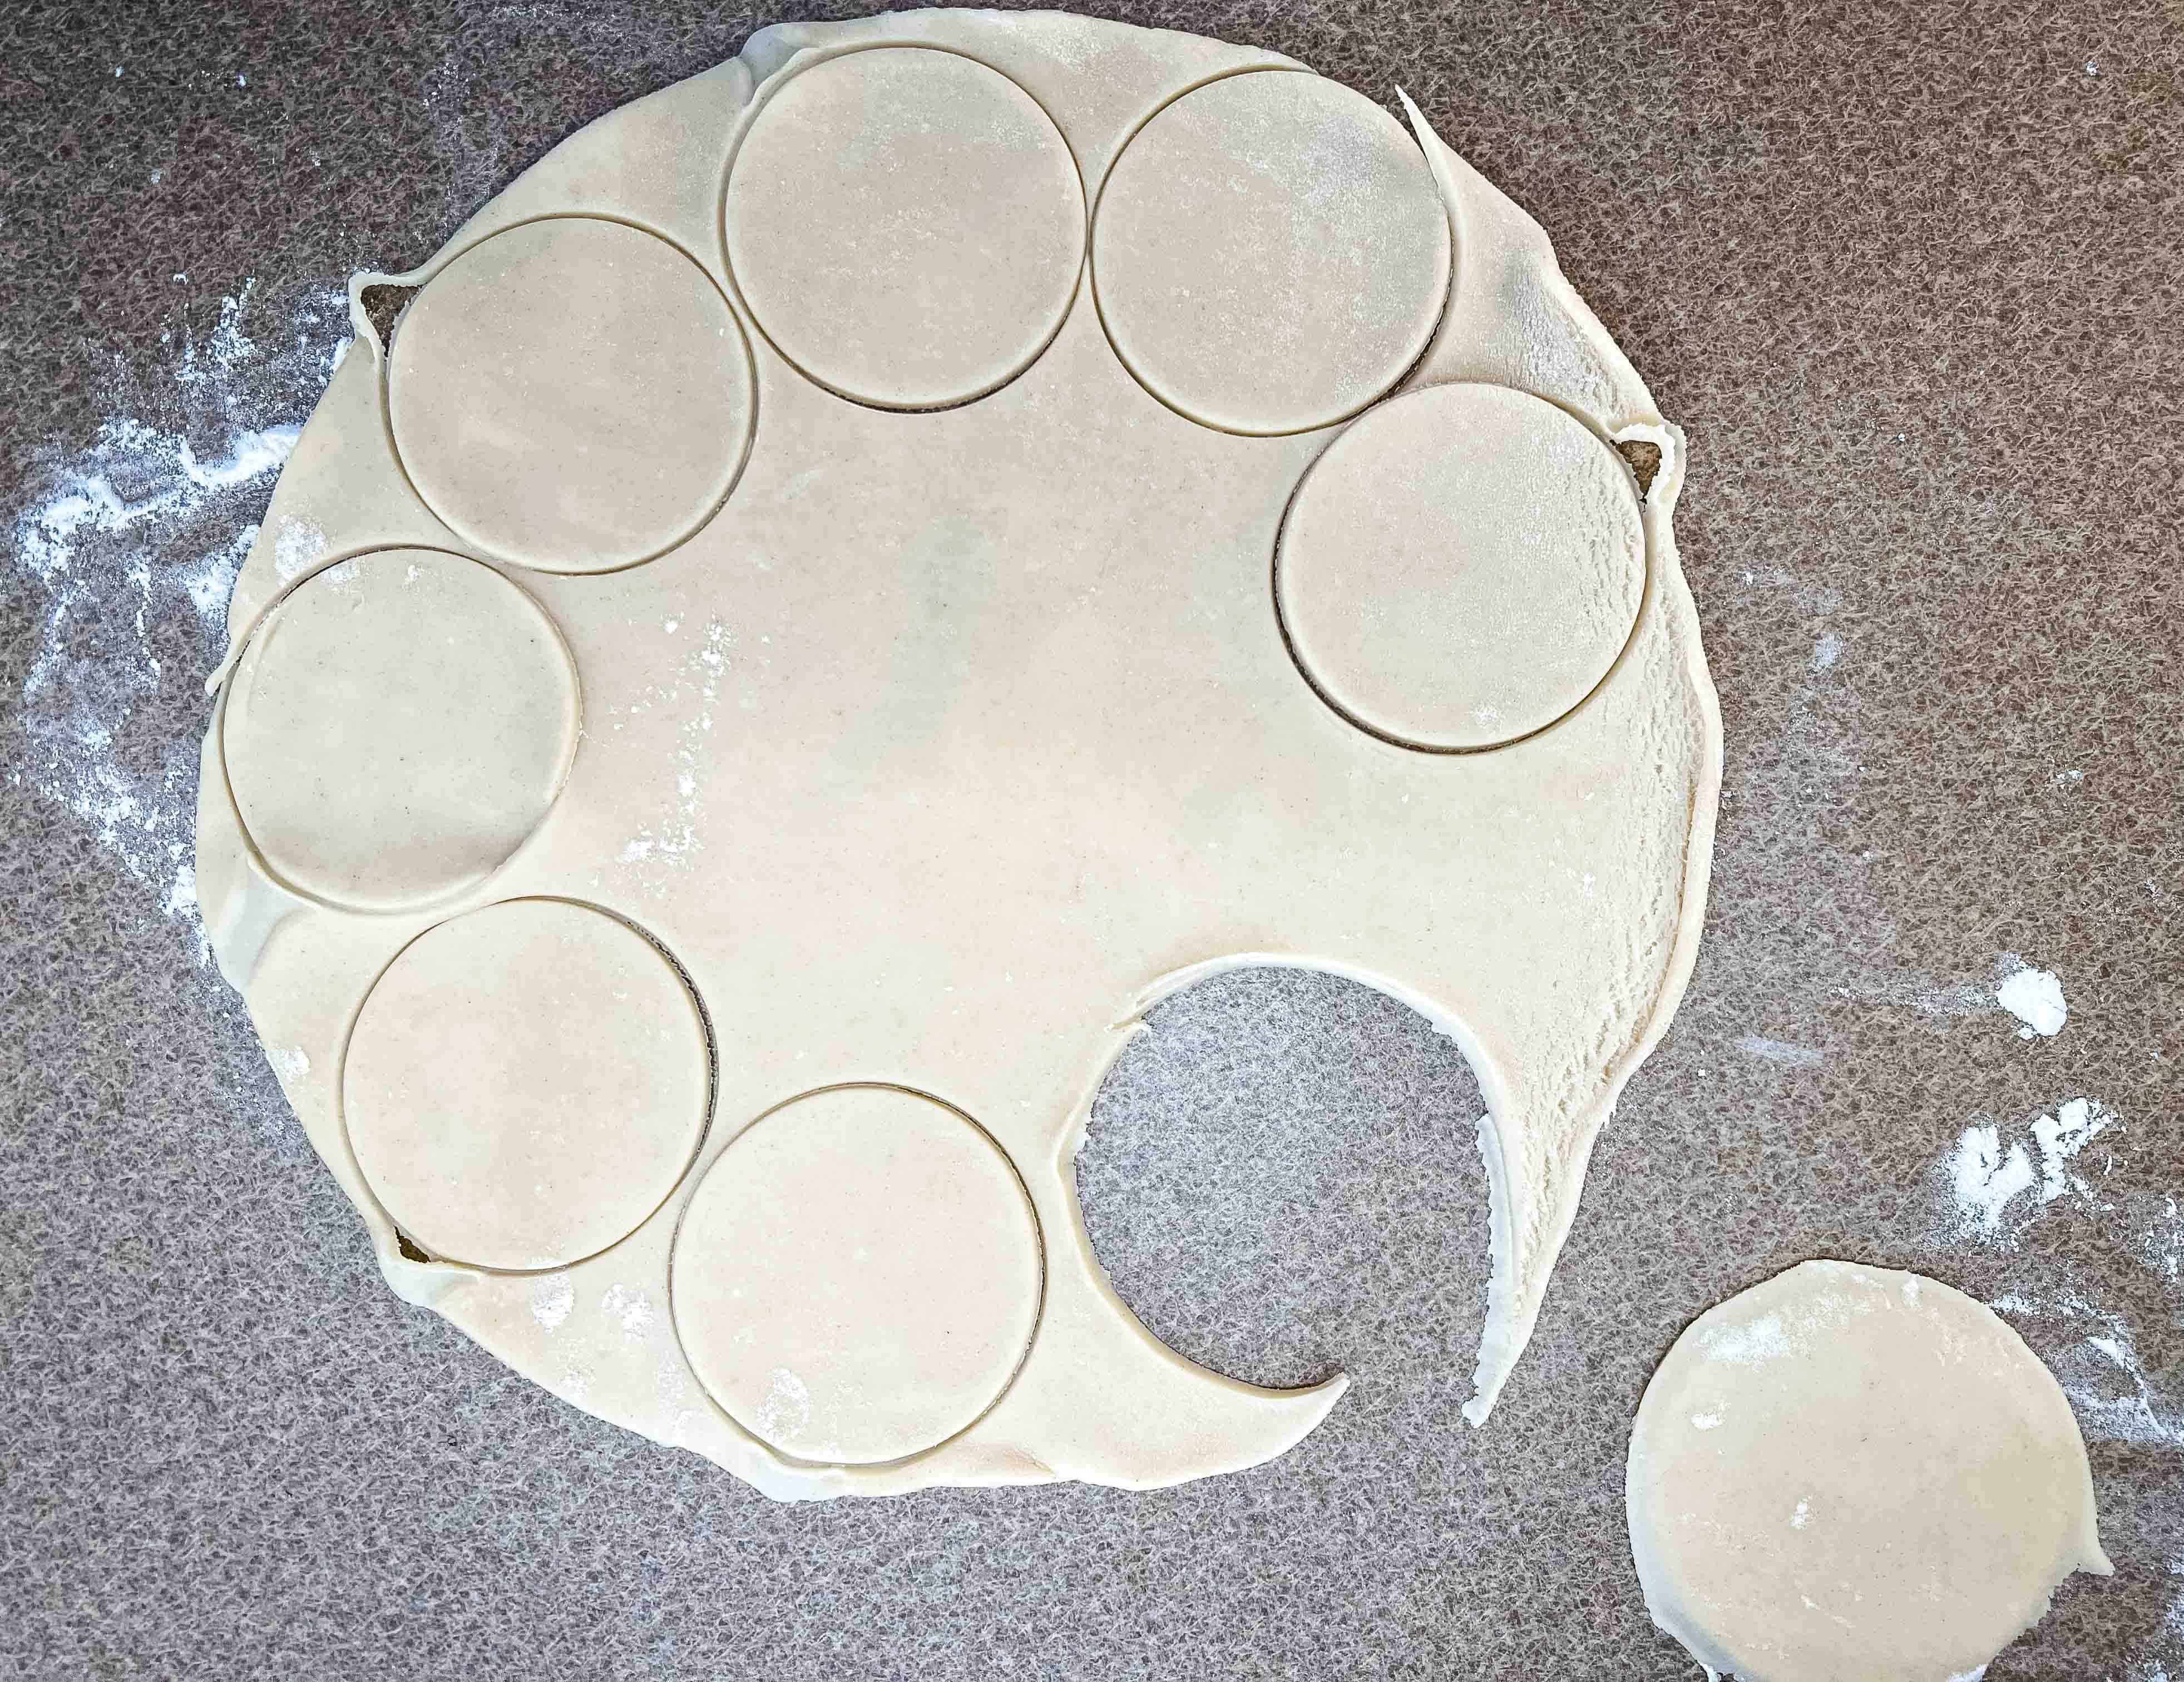 Cutting circles out of the dough.